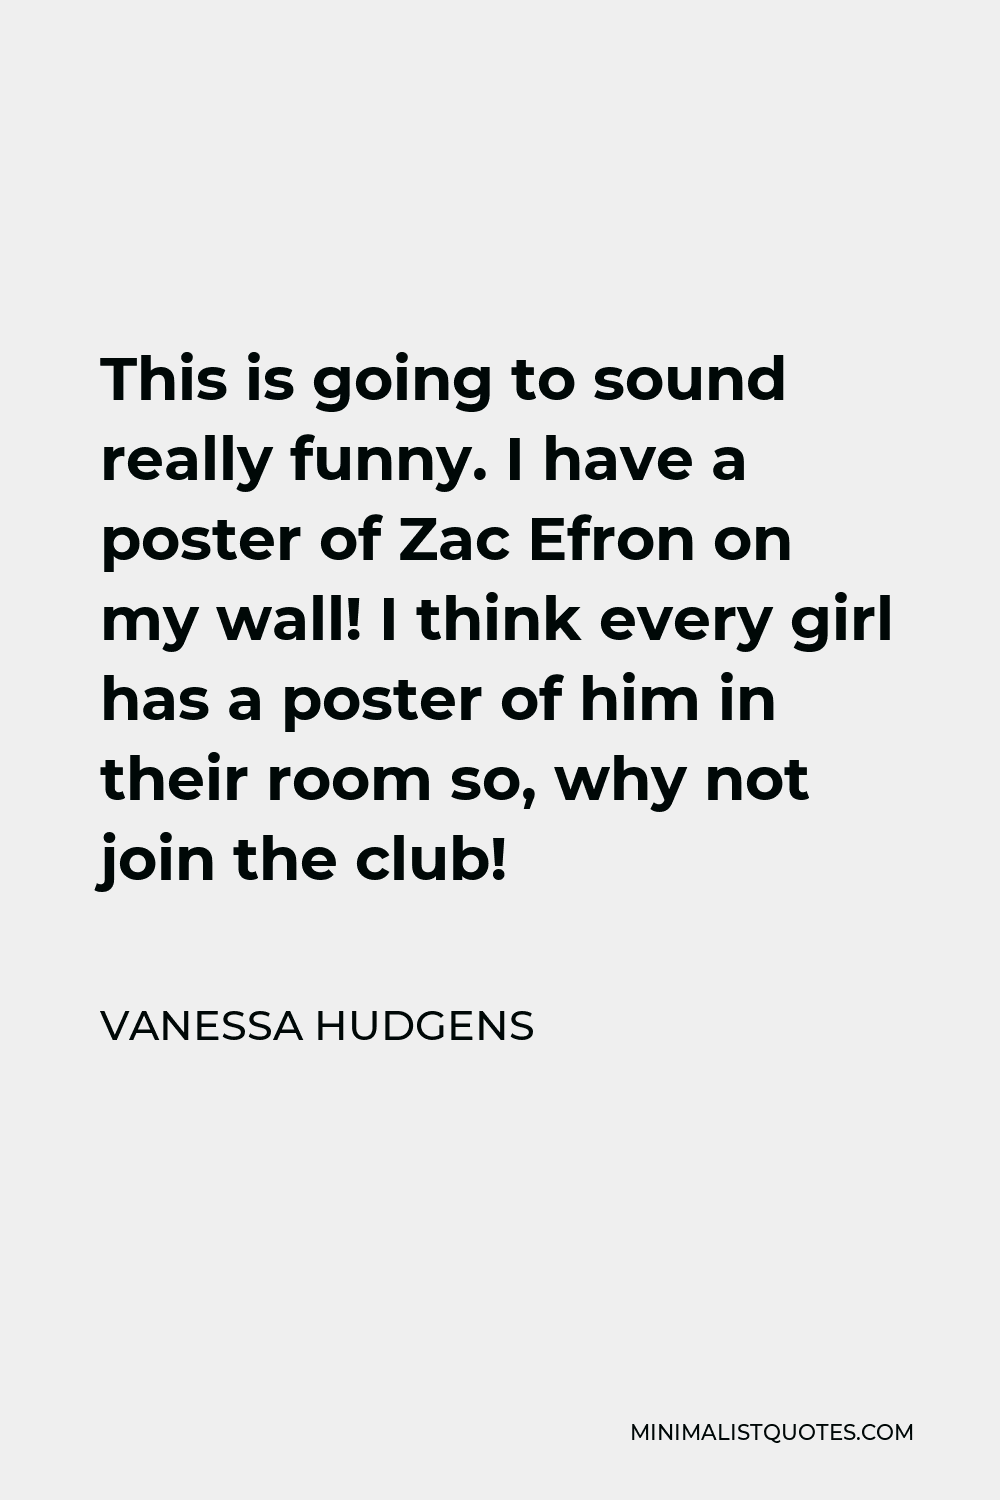 Vanessa Hudgens Quote - This is going to sound really funny. I have a poster of Zac Efron on my wall! I think every girl has a poster of him in their room so, why not join the club!